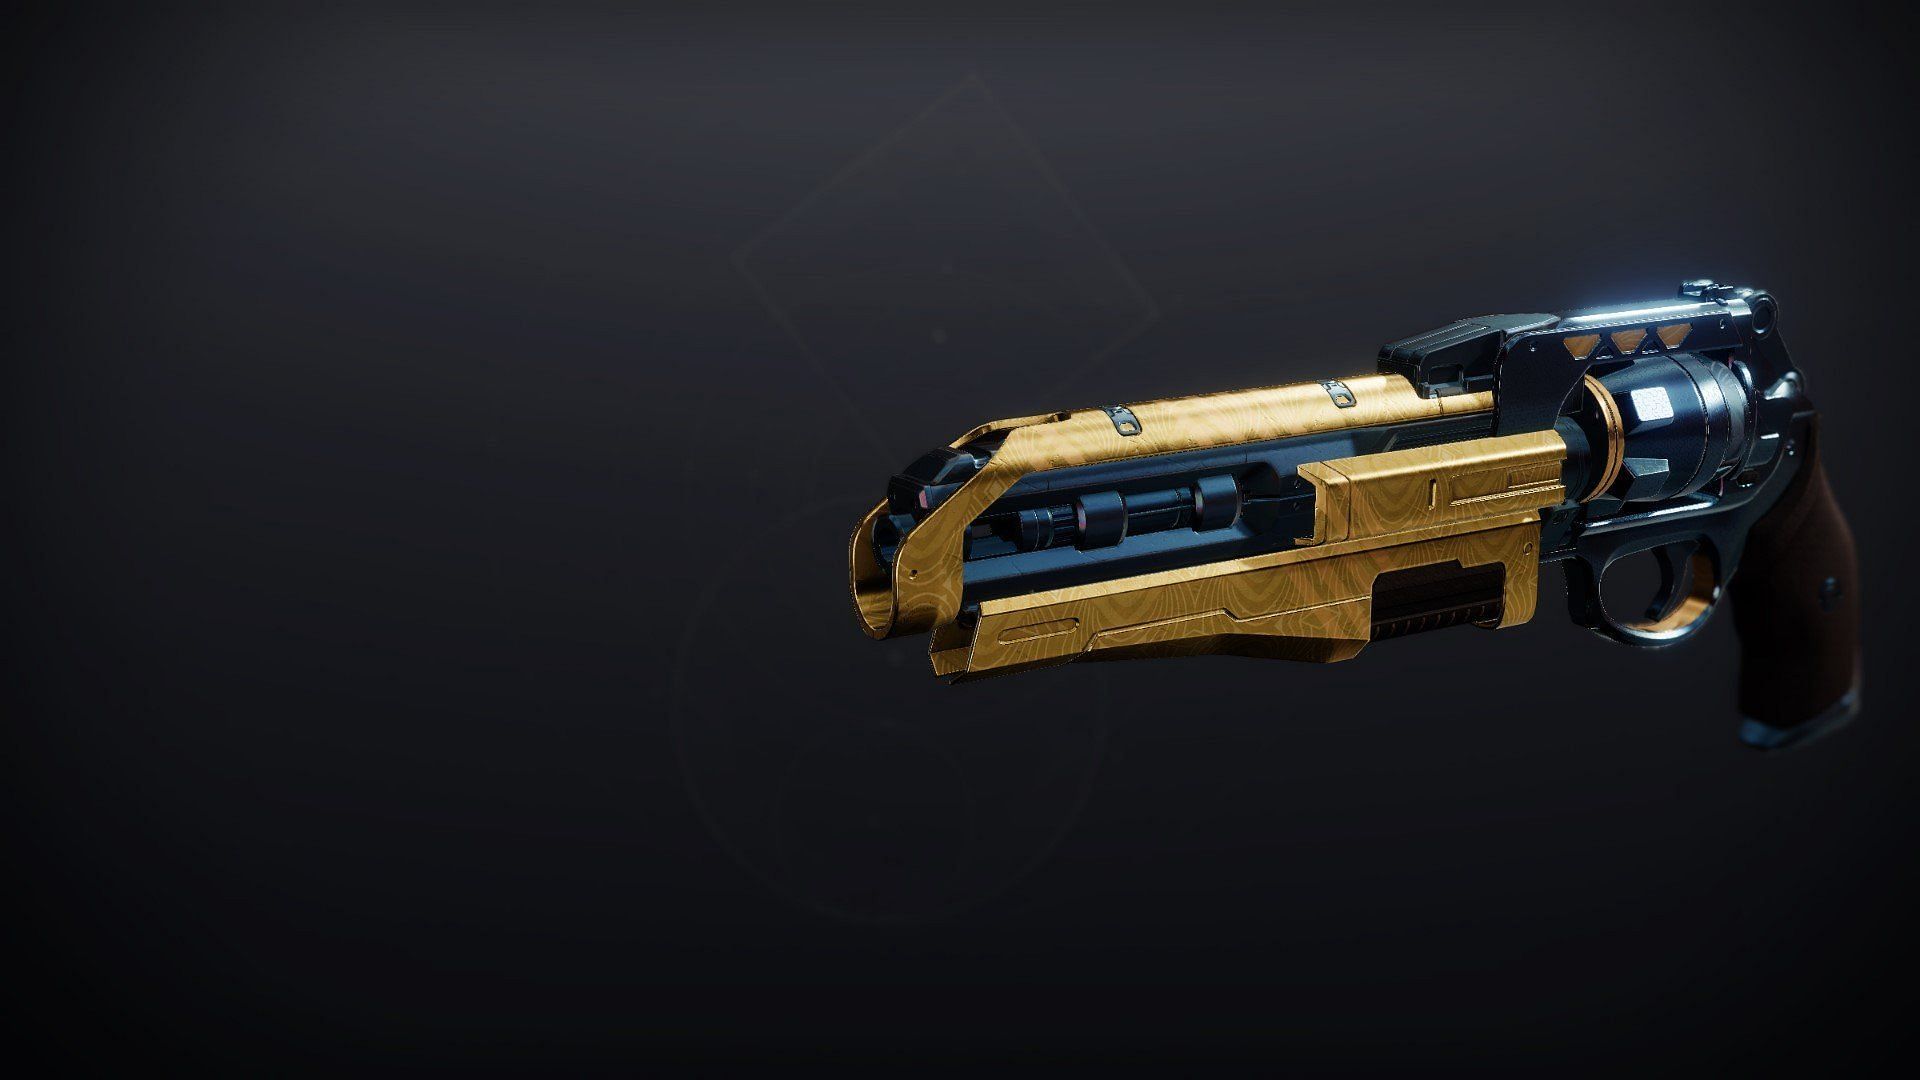 The Palindrome Adept (Image via Bungie)